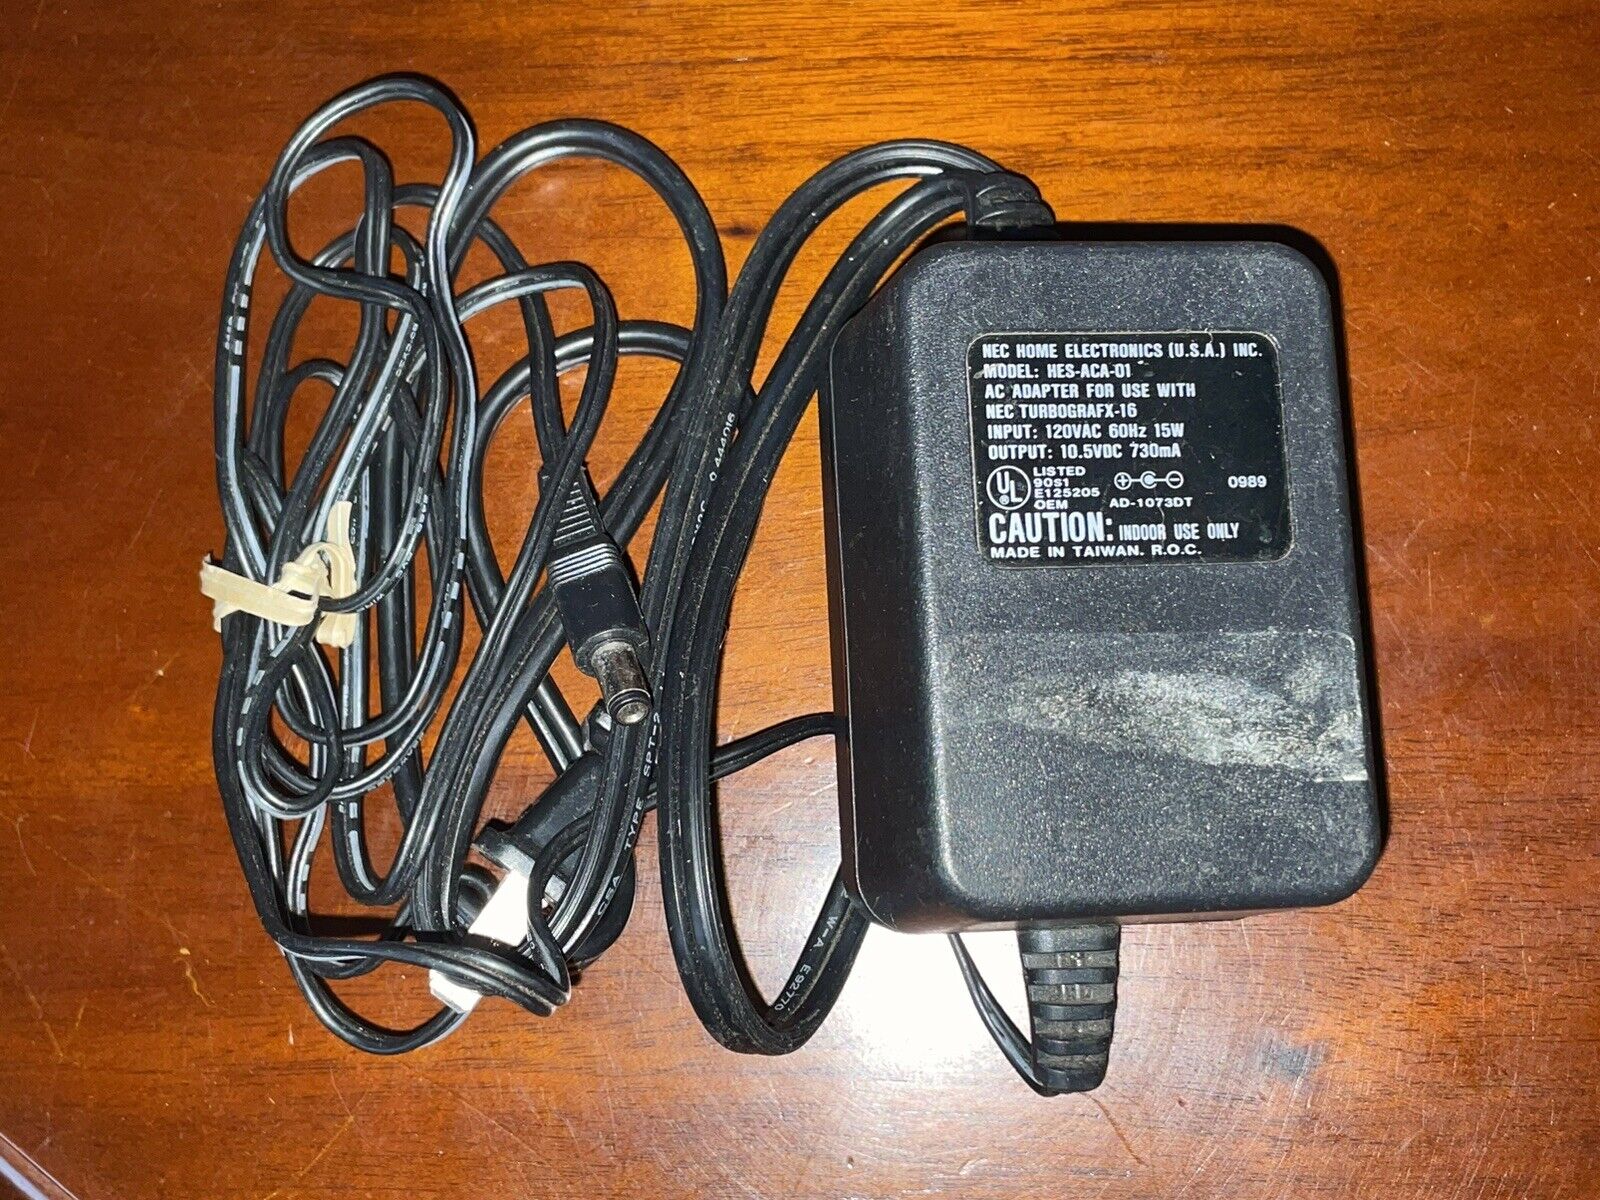 *Brand NEW* NEC 10.5V 730MA AC ADAPTER Turbo Grafx 16 AC Adapter OEM Official Cable Cord HES-ACA-01 Tested Pow - Click Image to Close